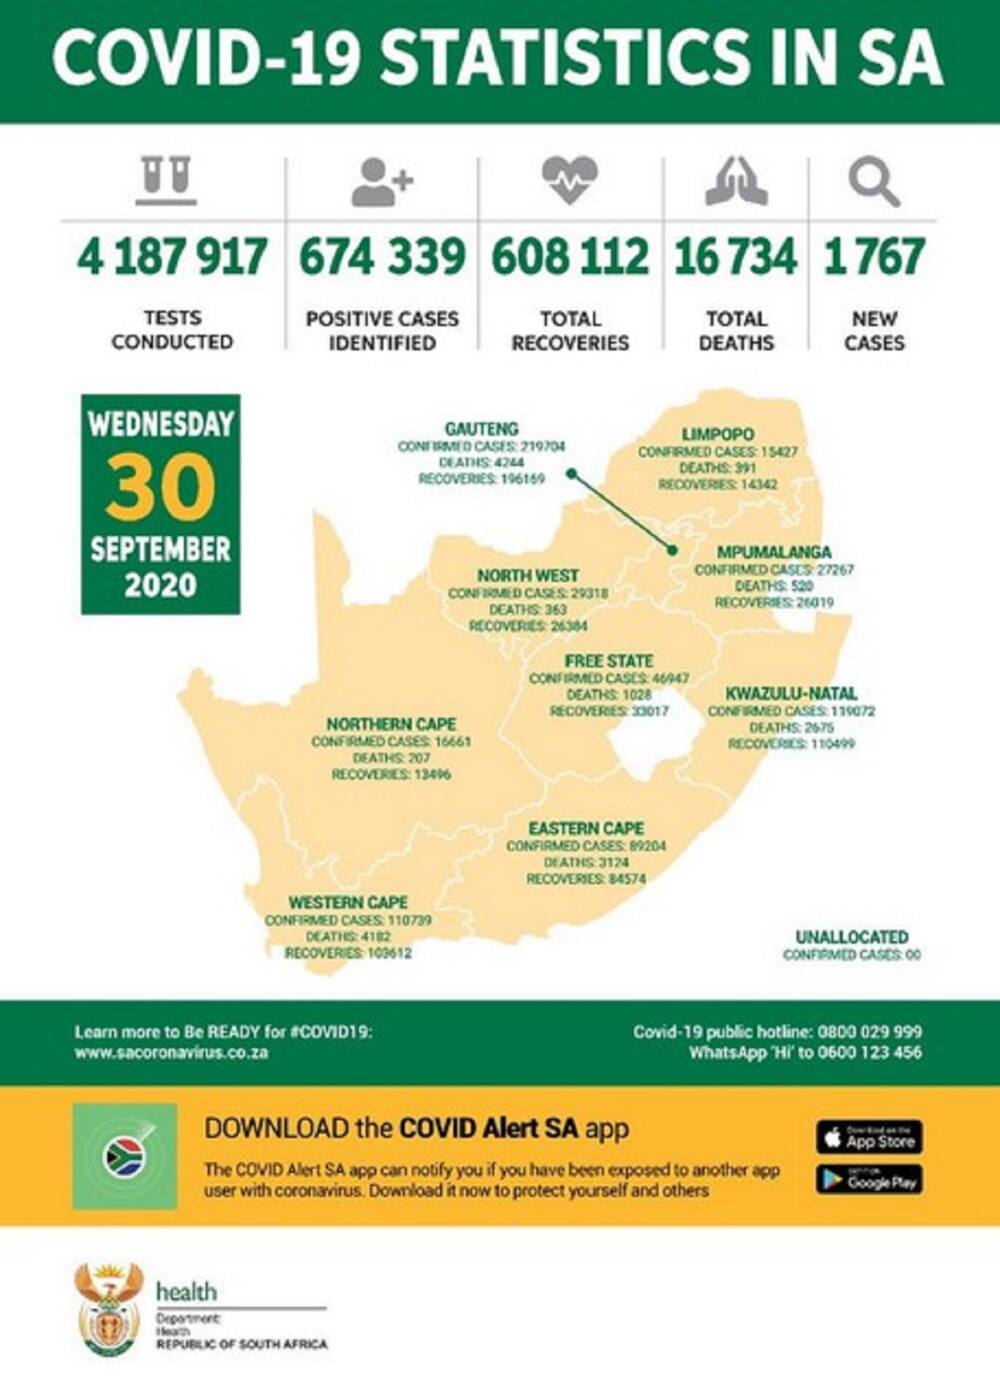 Covid-19 update: SA records 1 767 new cases, government opens borders